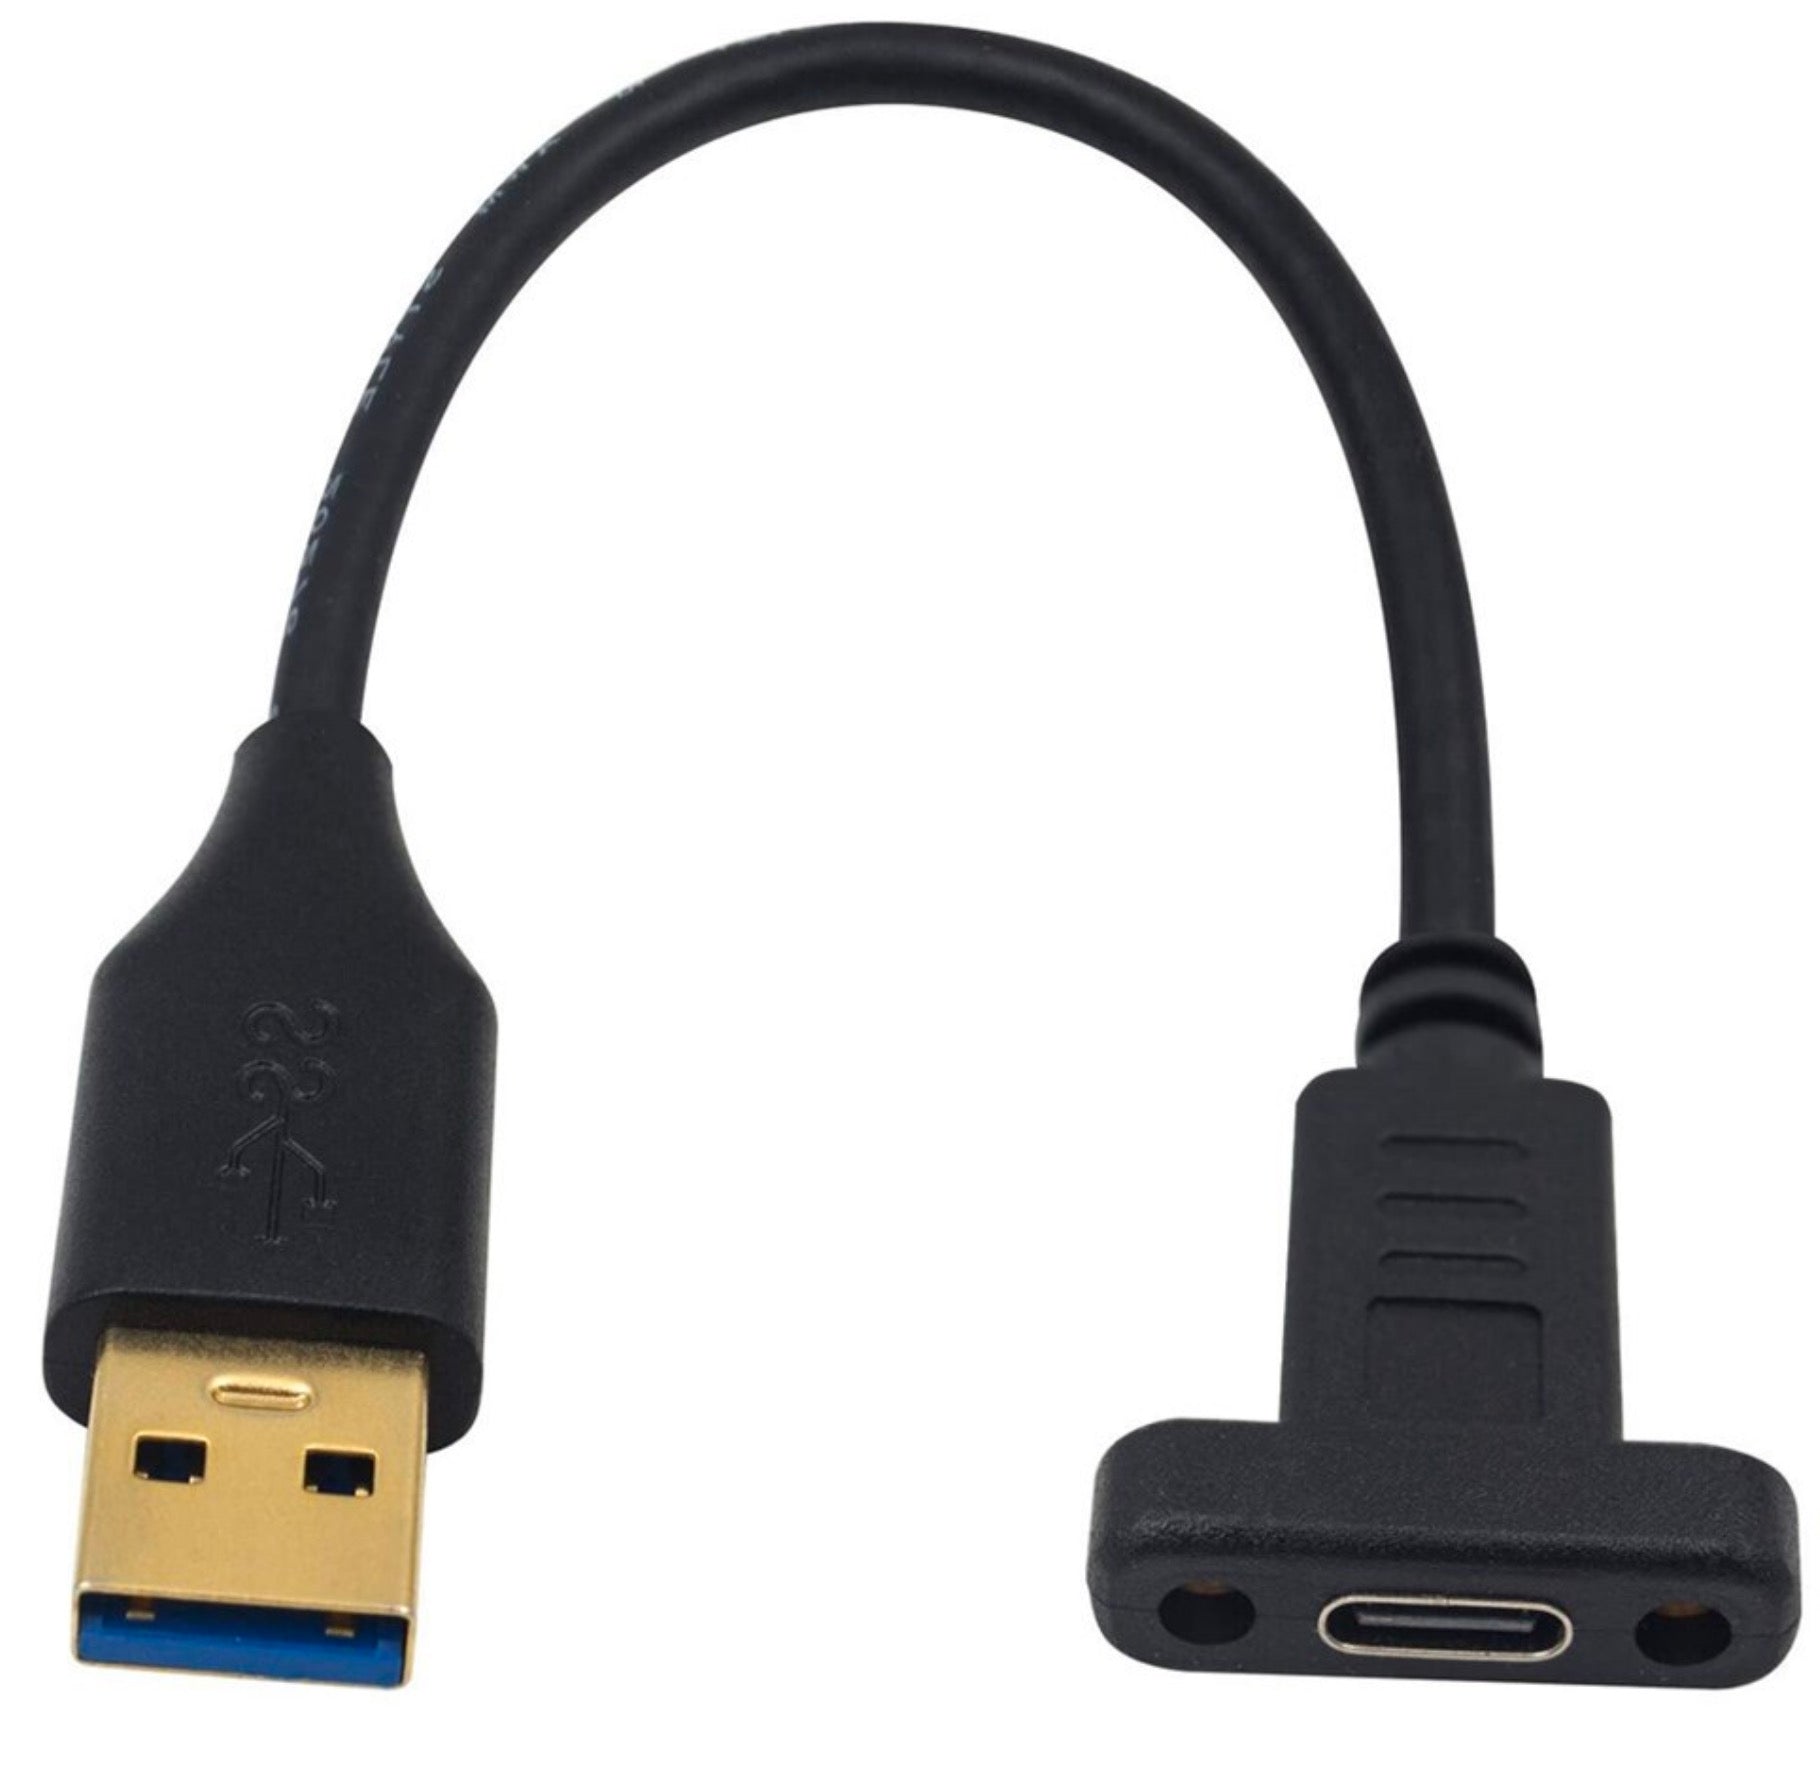 USB 3.0 Type A Male to USB-C Female Panel Mount Cable